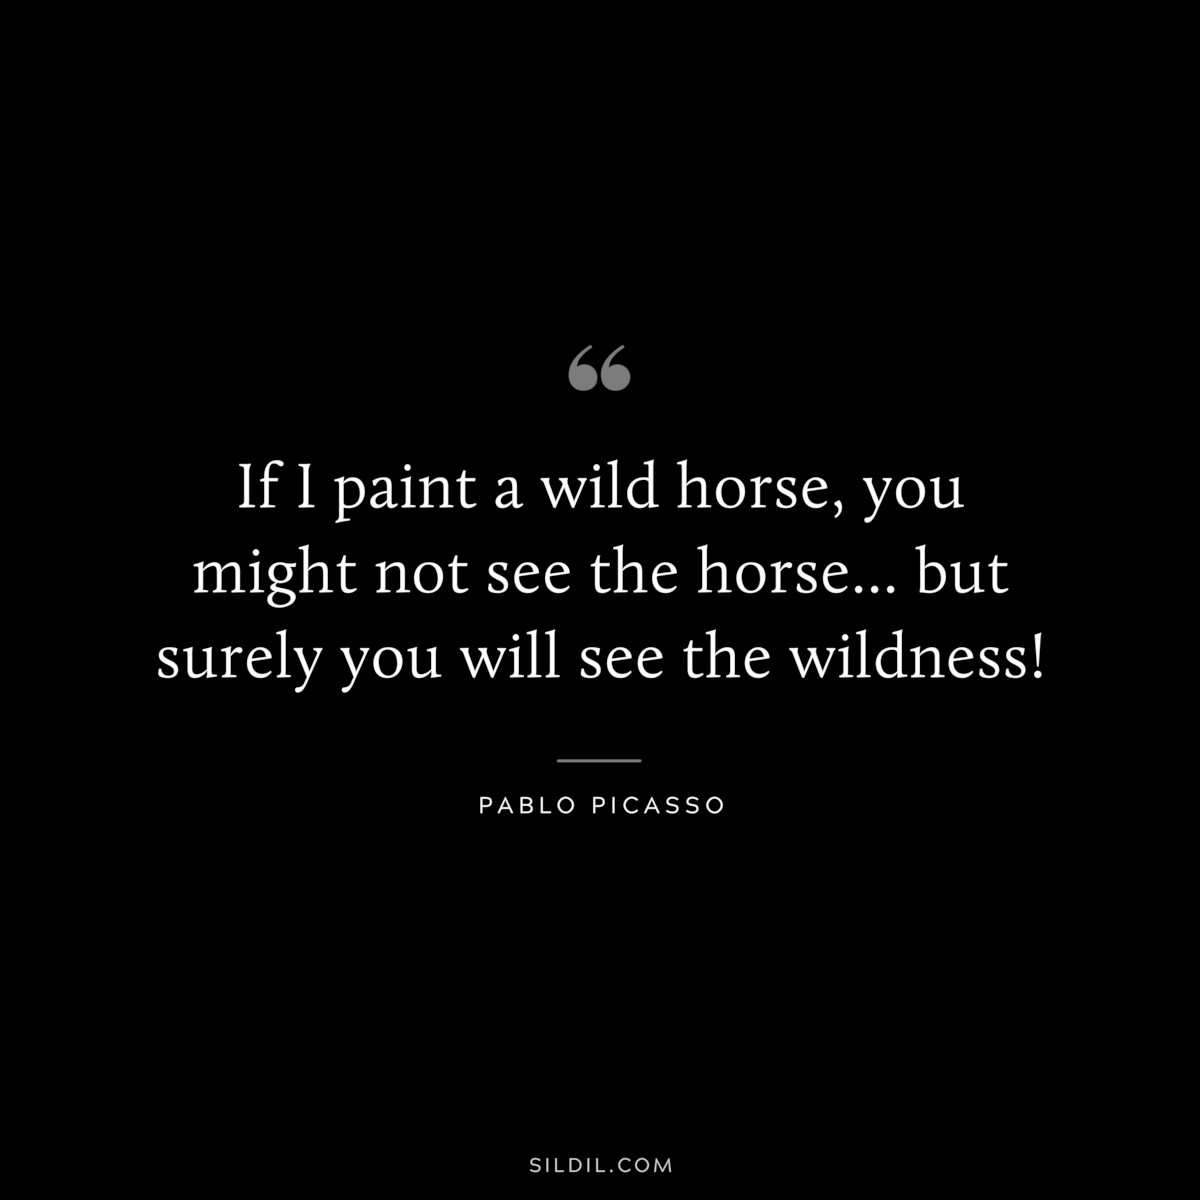 If I paint a wild horse, you might not see the horse... but surely you will see the wildness! ― Pablo Picasso